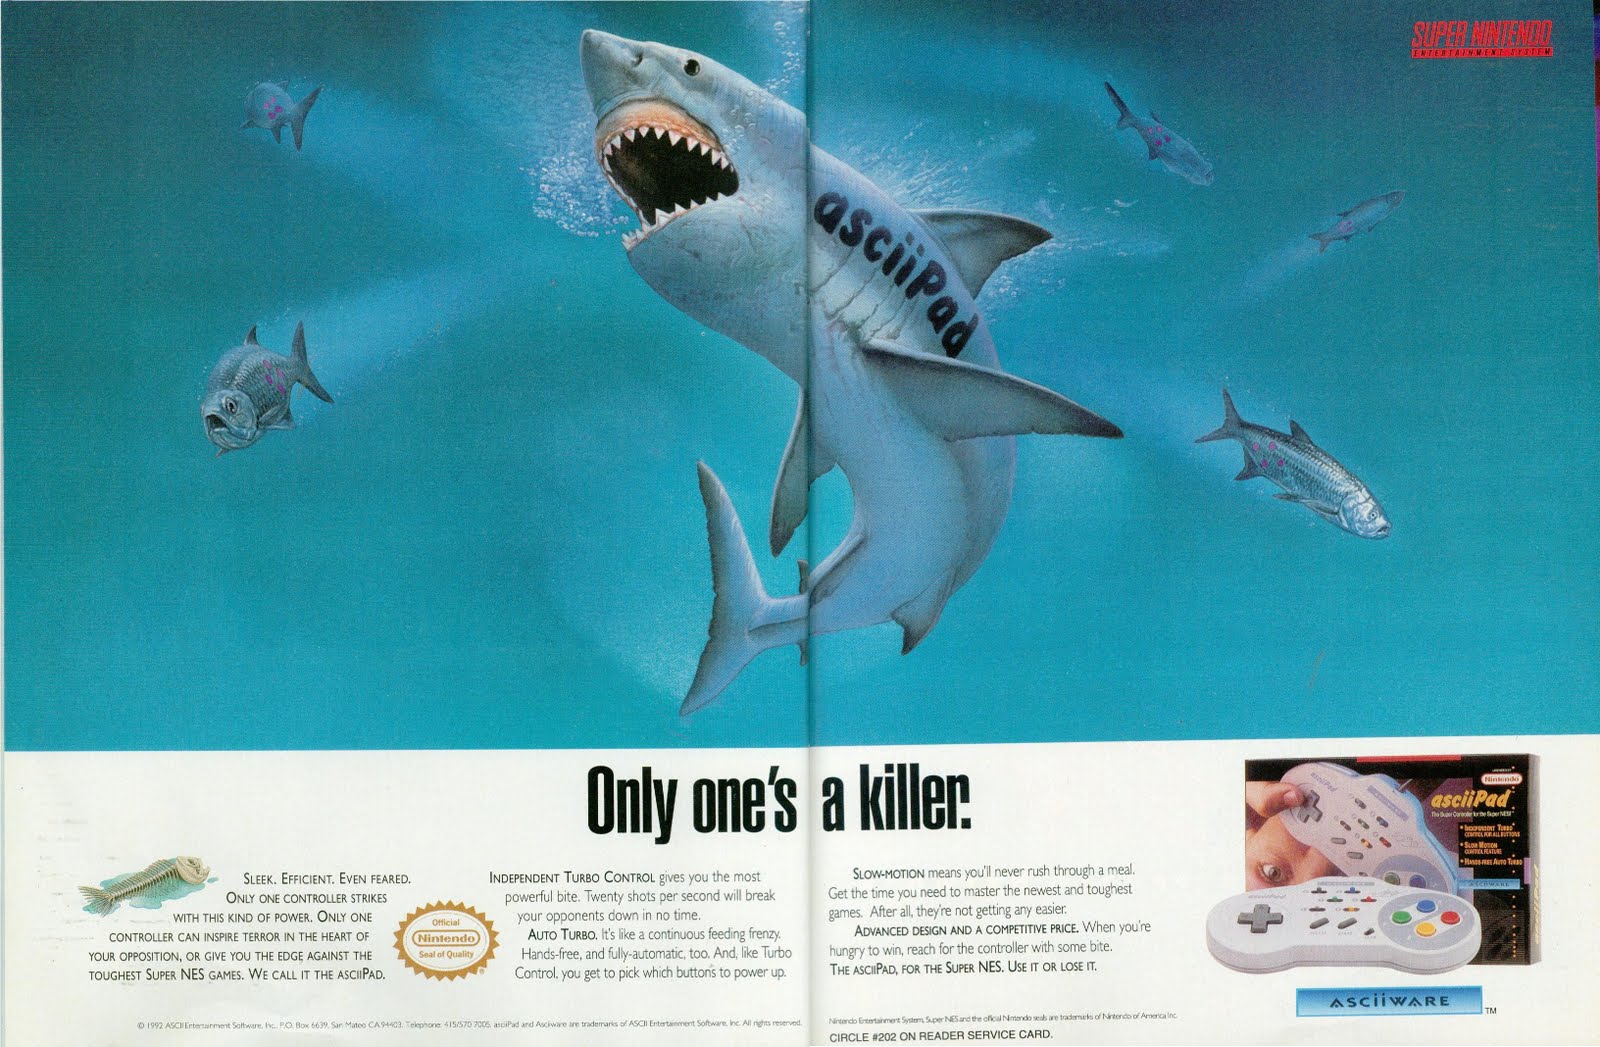 vintage gaming ads - vintage marine ads - Entertainment System Oscuitq Nintendo Only one's a killer. asciiPad The Cartolere Auto Toad Oficial Sleek. Efficient. Even Feared. Only One Controller Strikes With This Kind Of Power. Only One Controller Can Inspi